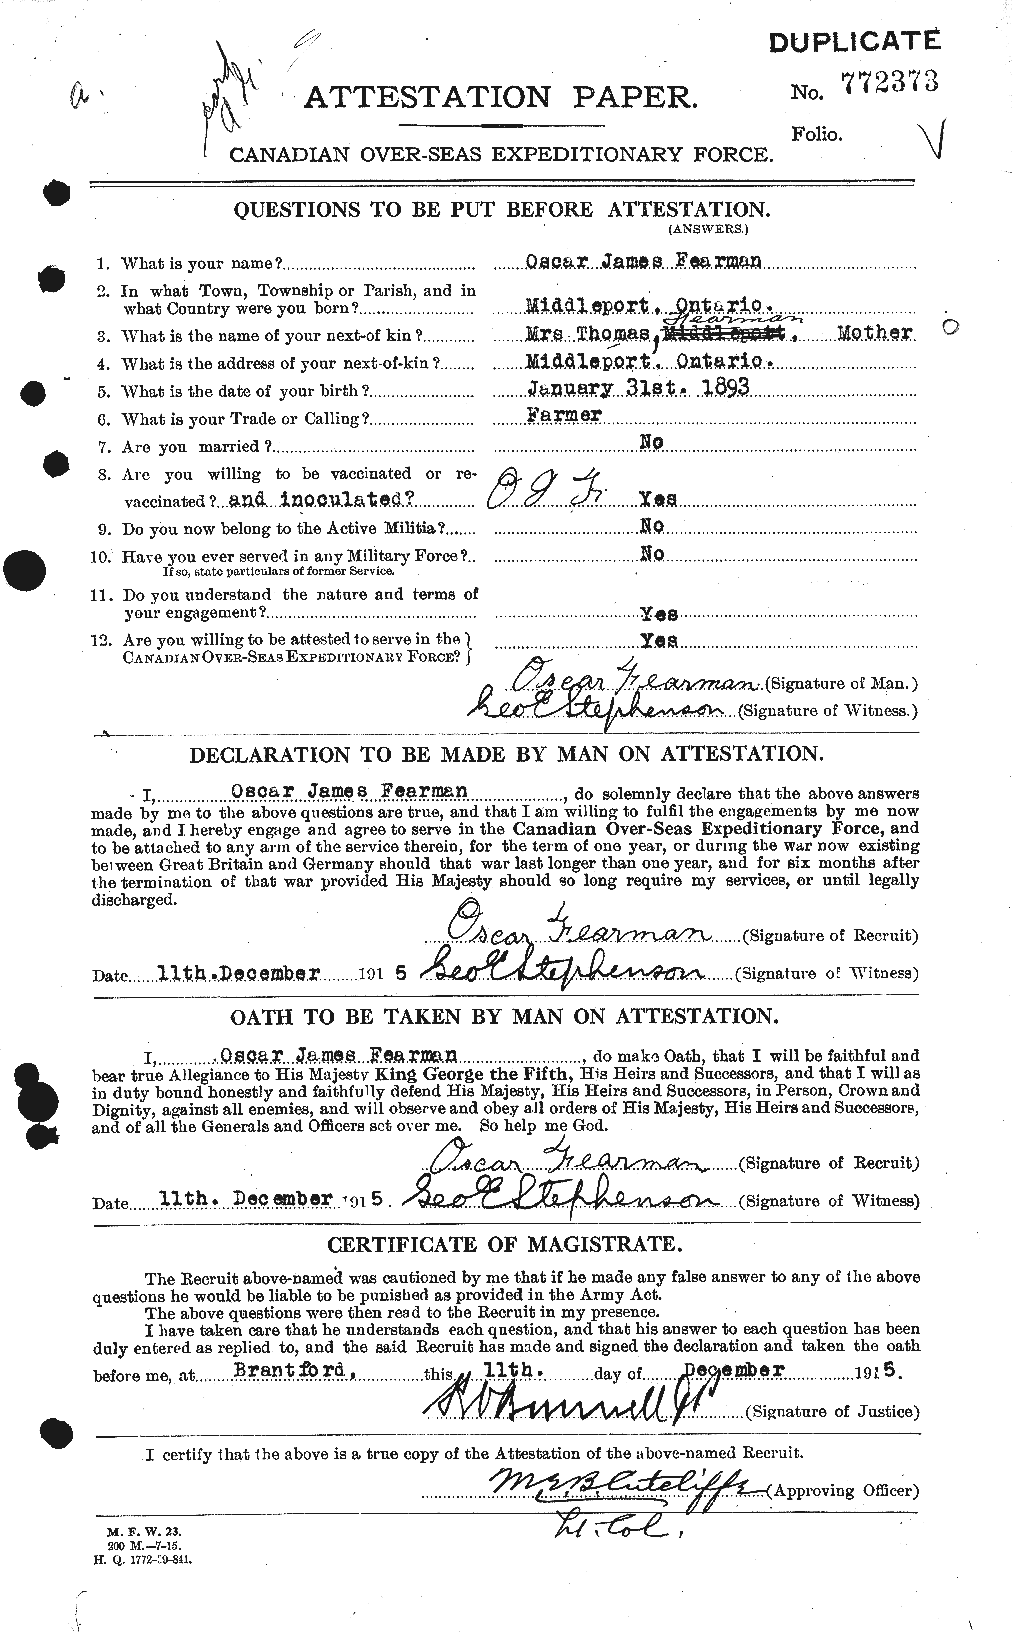 Personnel Records of the First World War - CEF 319562a